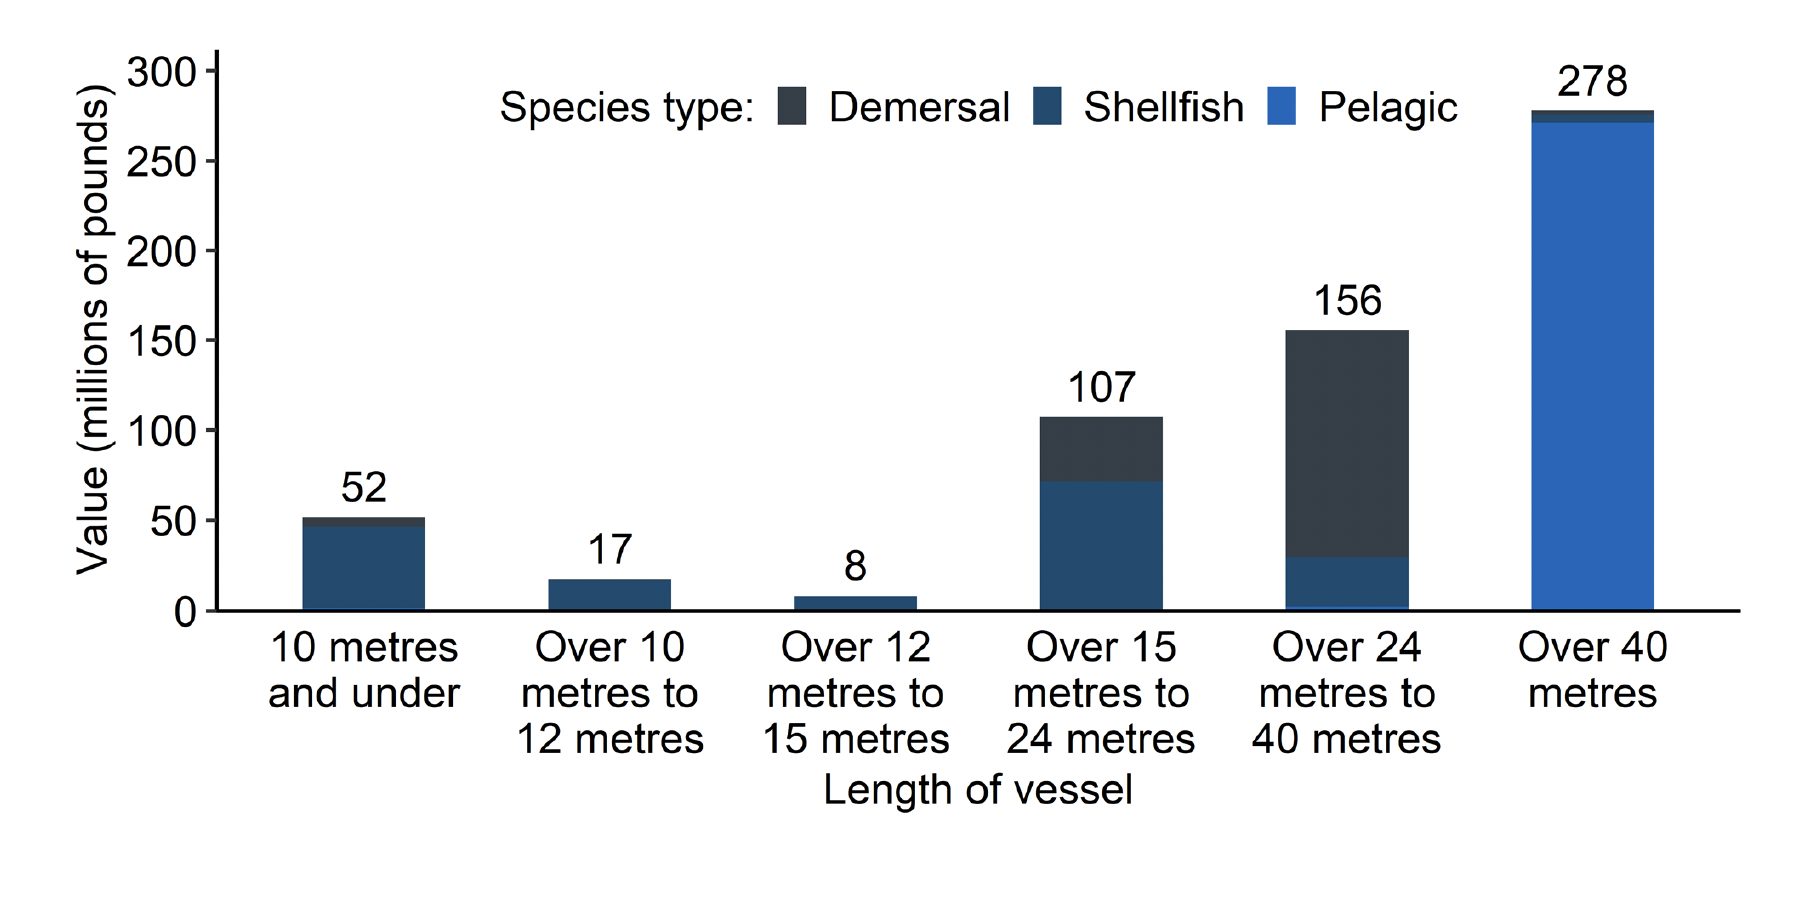 A stacked bar chart showing the value of fish and shellfish landed by Scottish vessels by their length category in 2022. The graph shows the proportions of demersal, pelagic and shellfish landed by each length category. The over 40 metre vessels have the highest value landed with the majority of their landings being pelagic species.